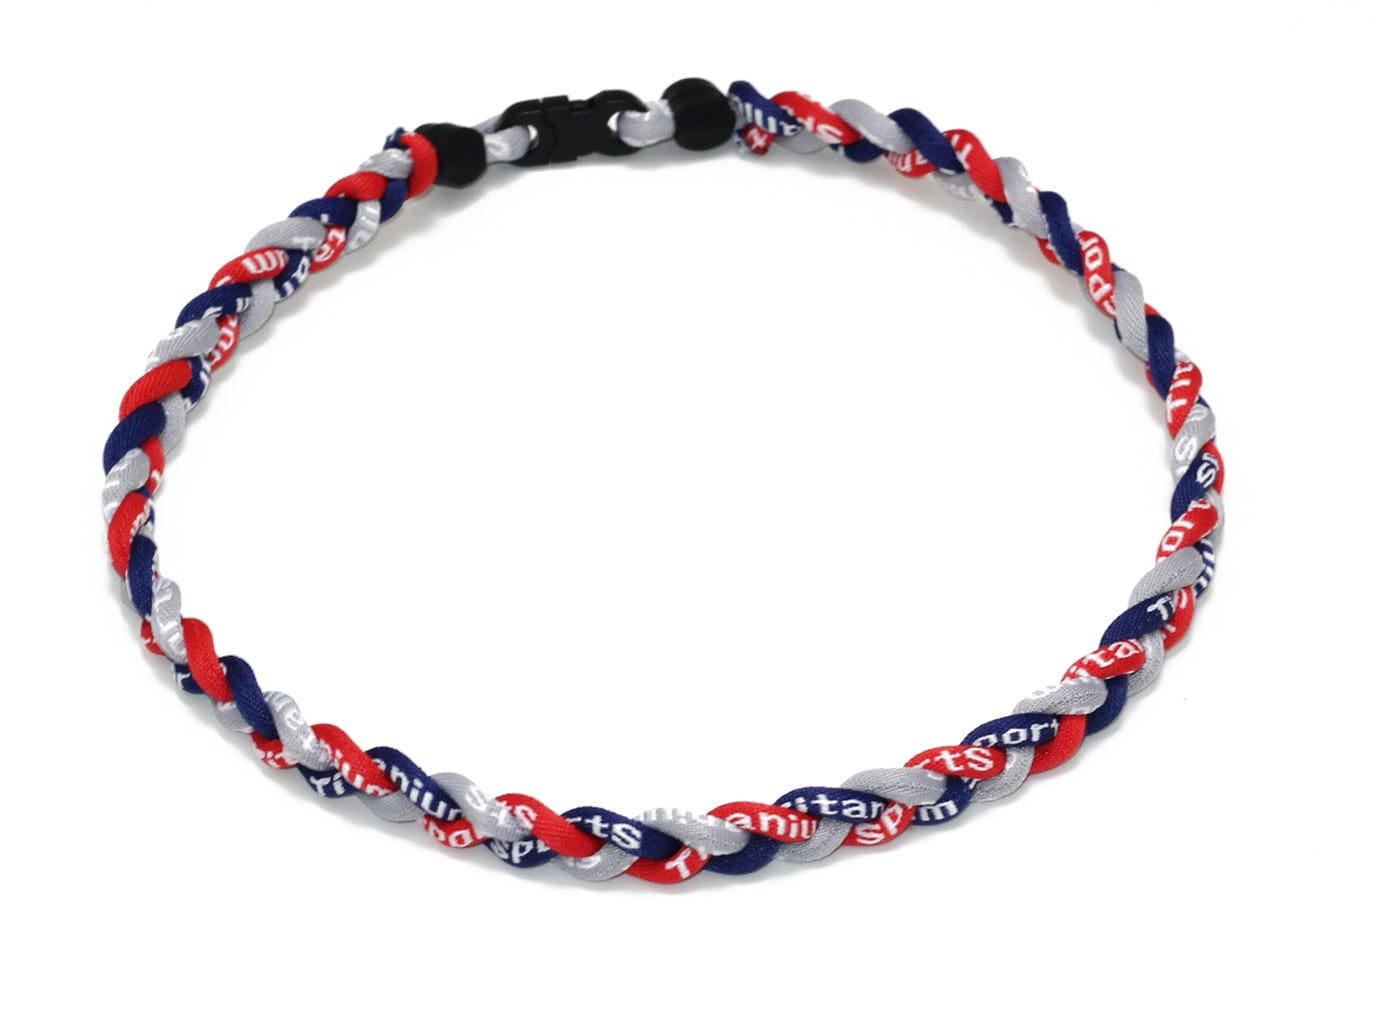 PACK OF TWO 18" 3 Rope Titanium Sports Necklace Navy Blue White Tornado Baseball 